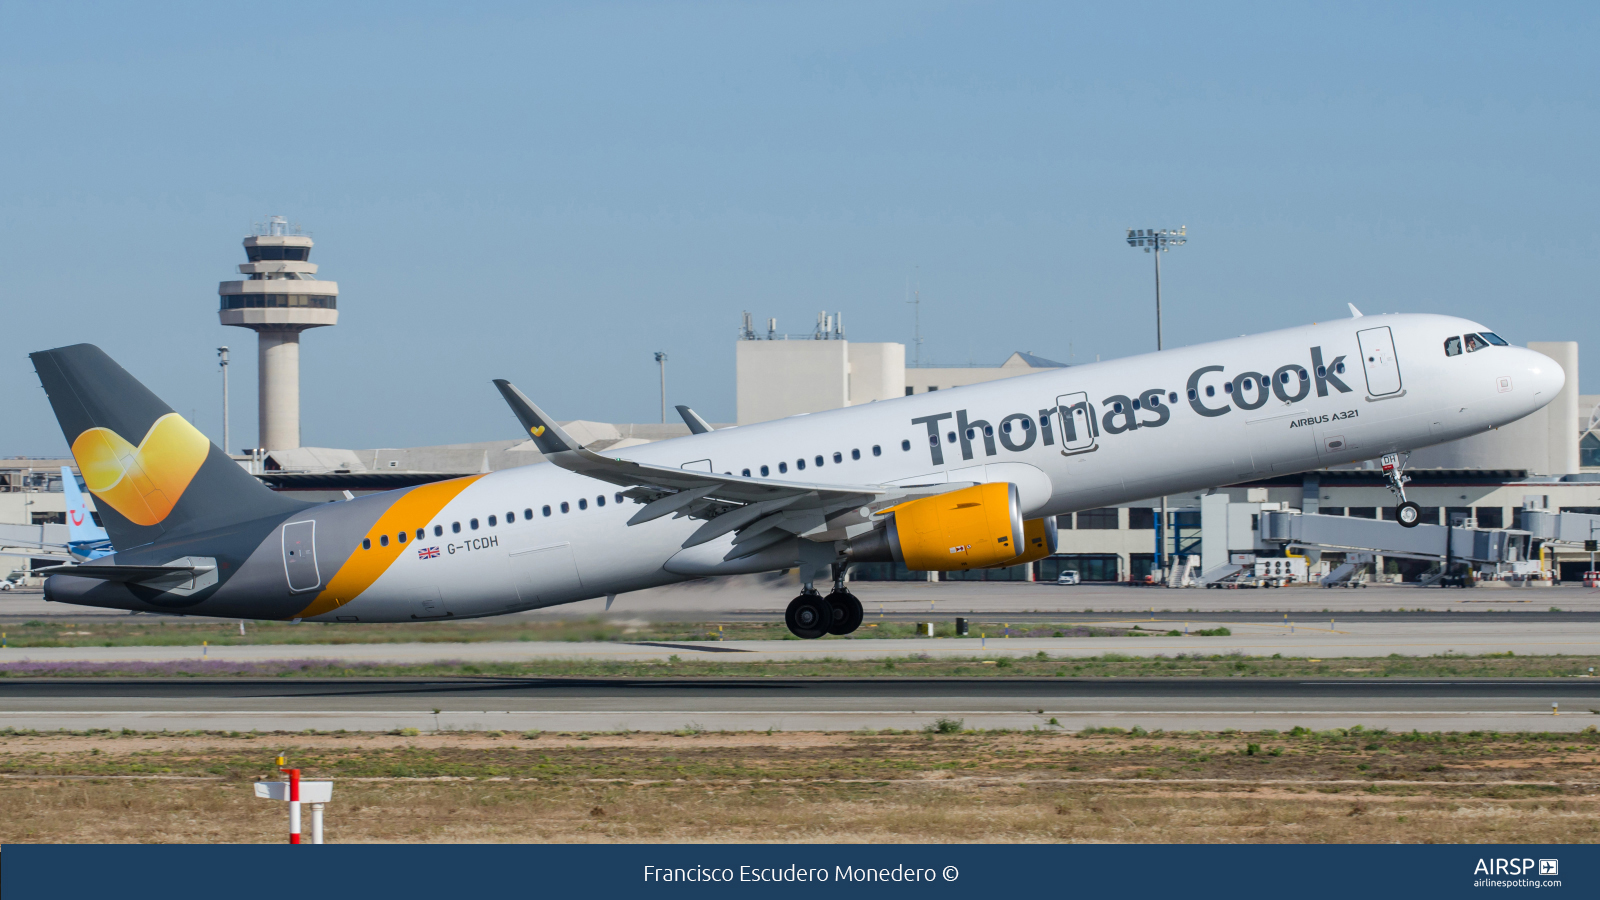 Thomas Cook Airlines  Airbus A321  G-TCDH